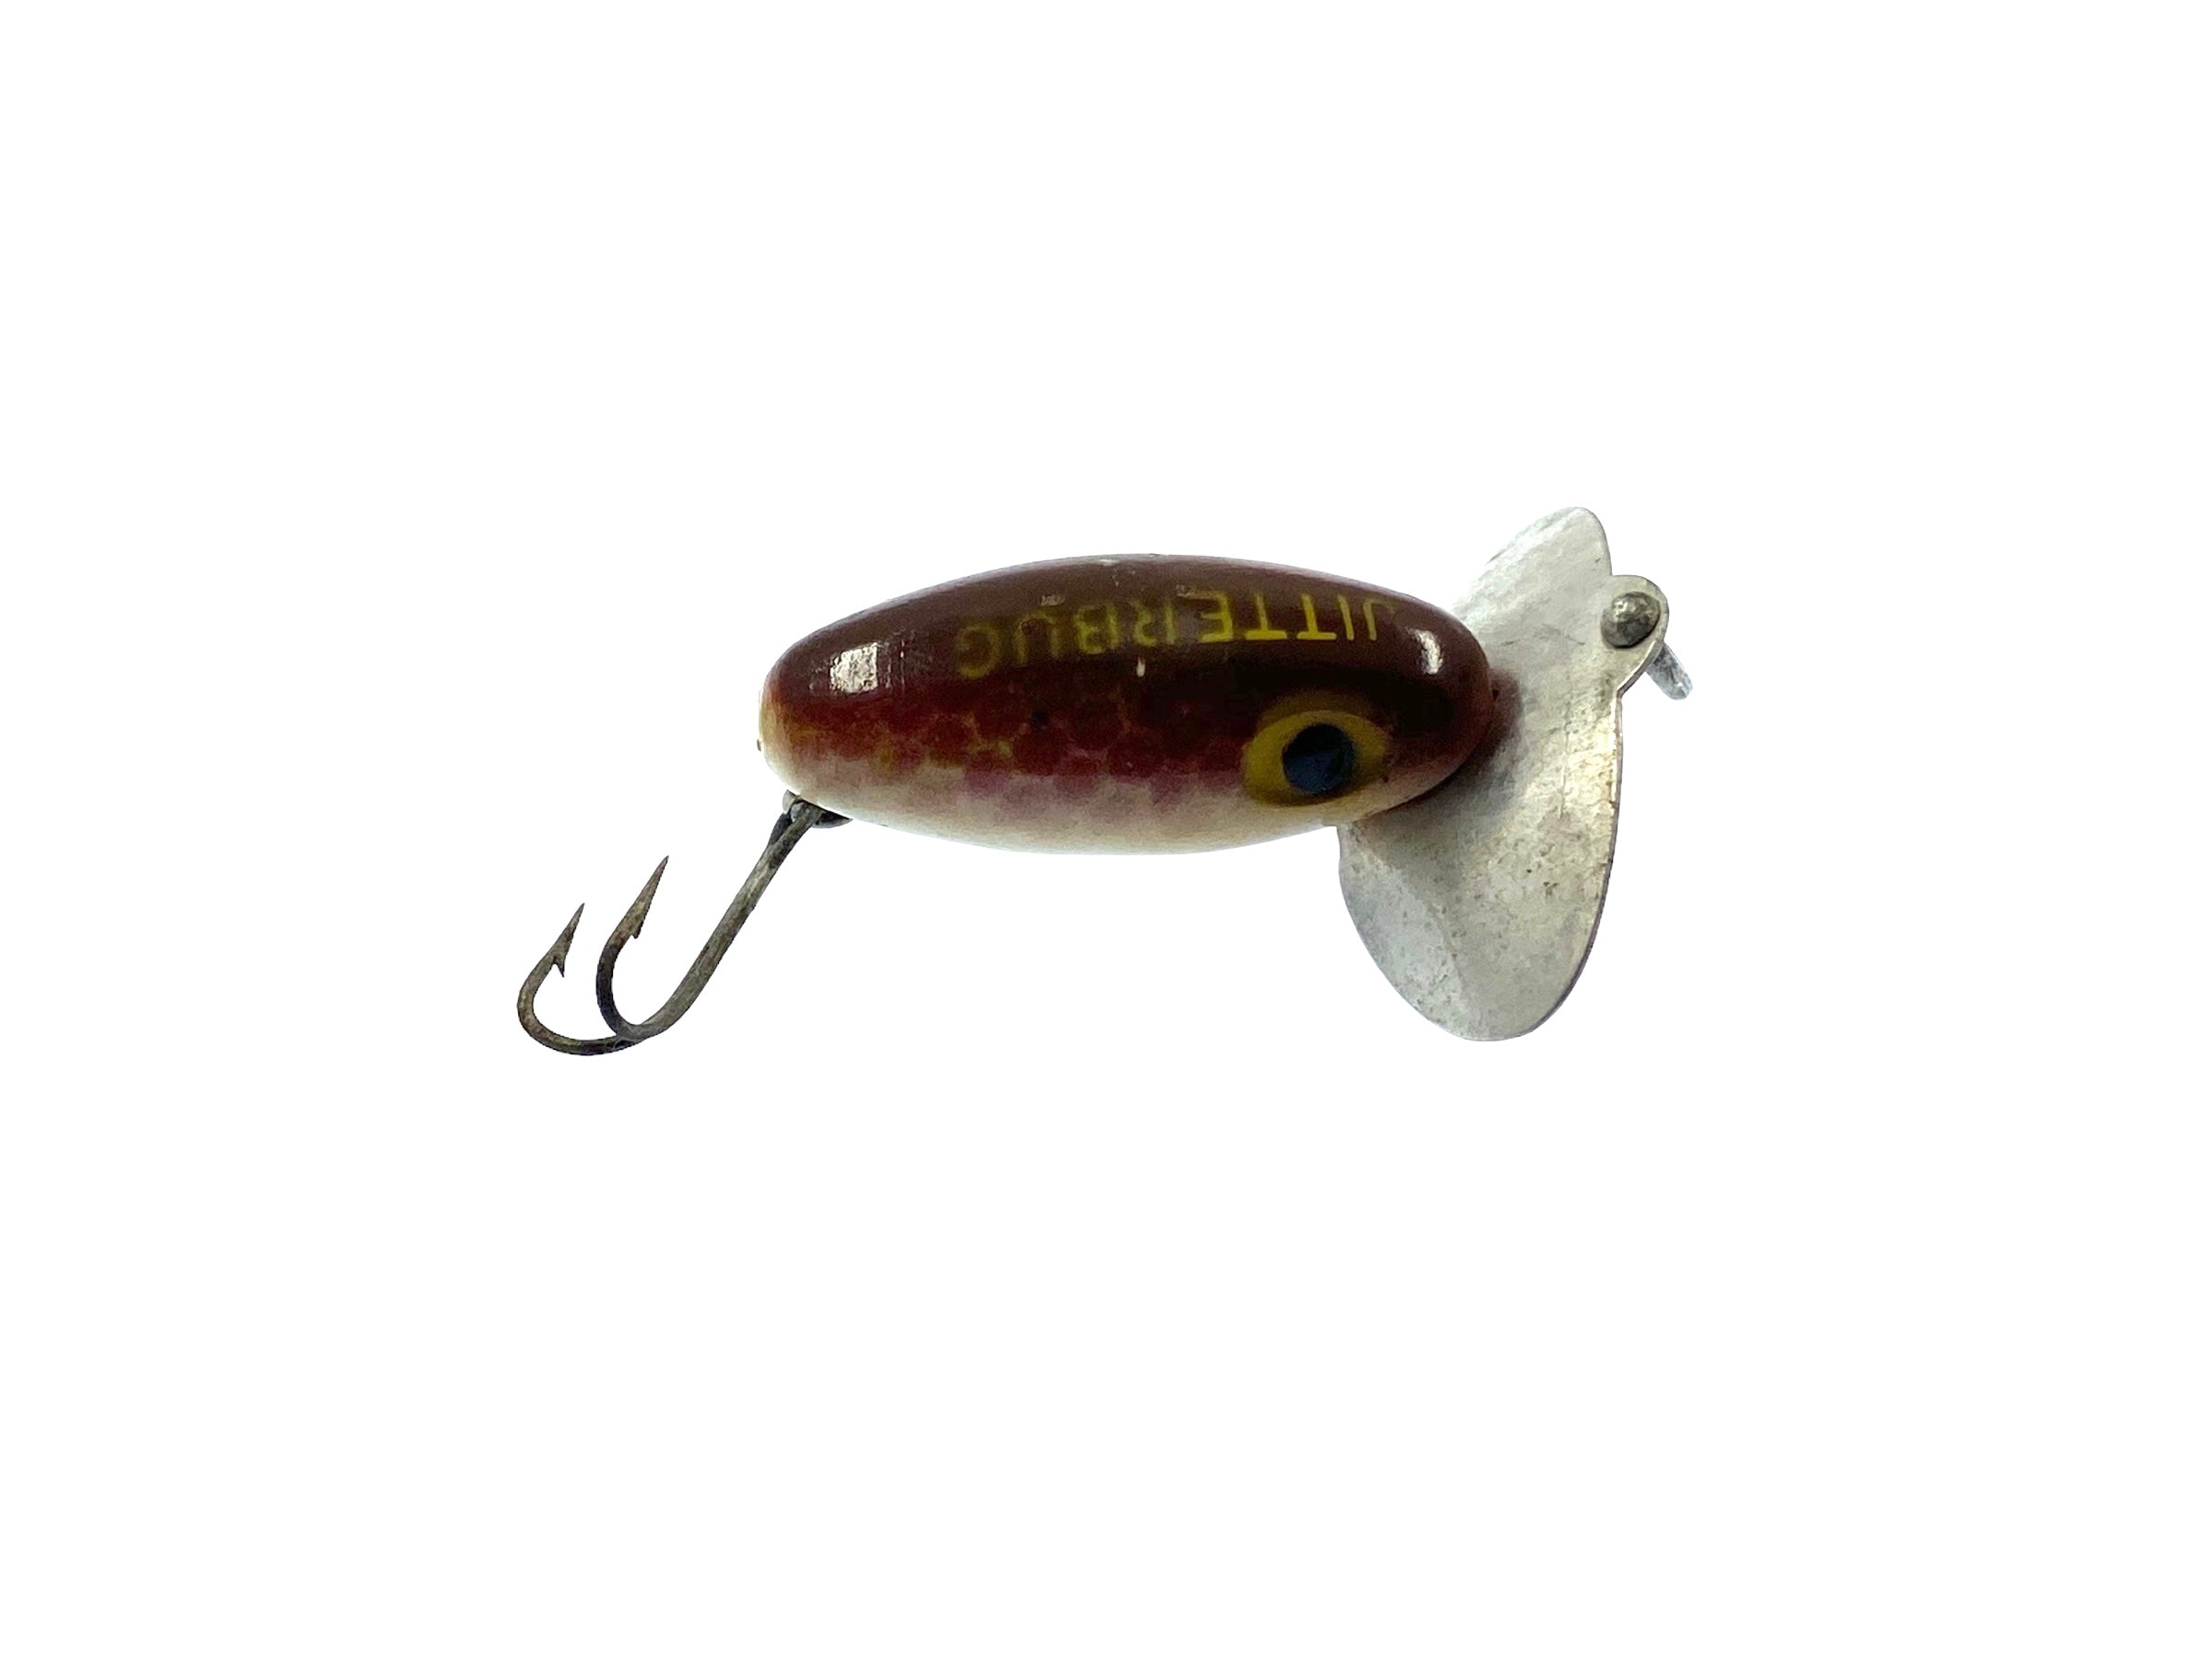 Vintage Fred Arbogast Jitterbug Fishing Lure - Silver Yellow - VG